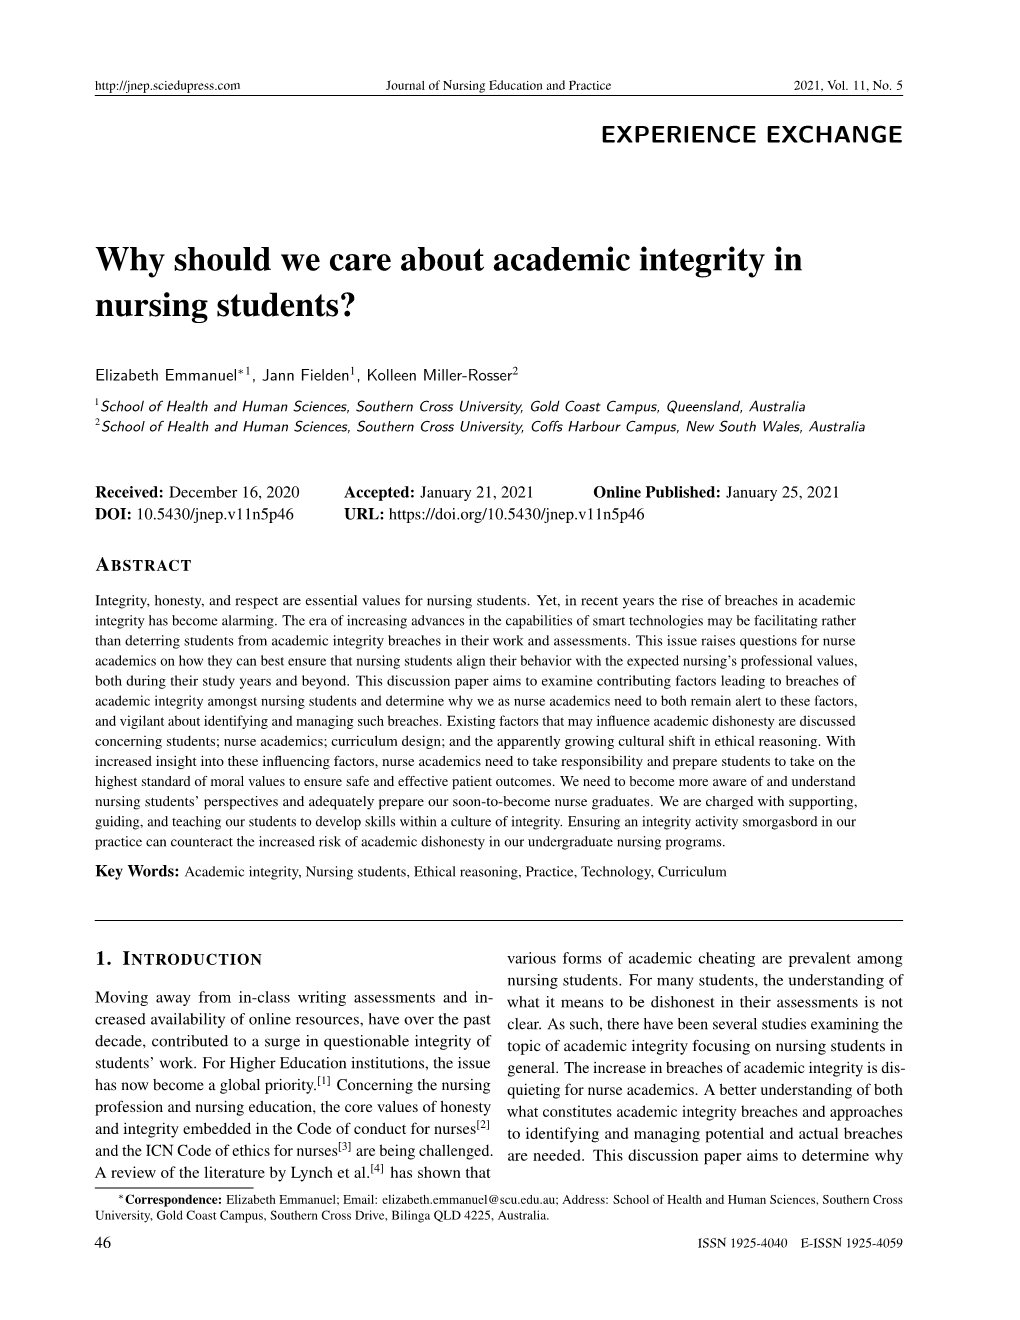 Why Should We Care About Academic Integrity in Nursing Students?